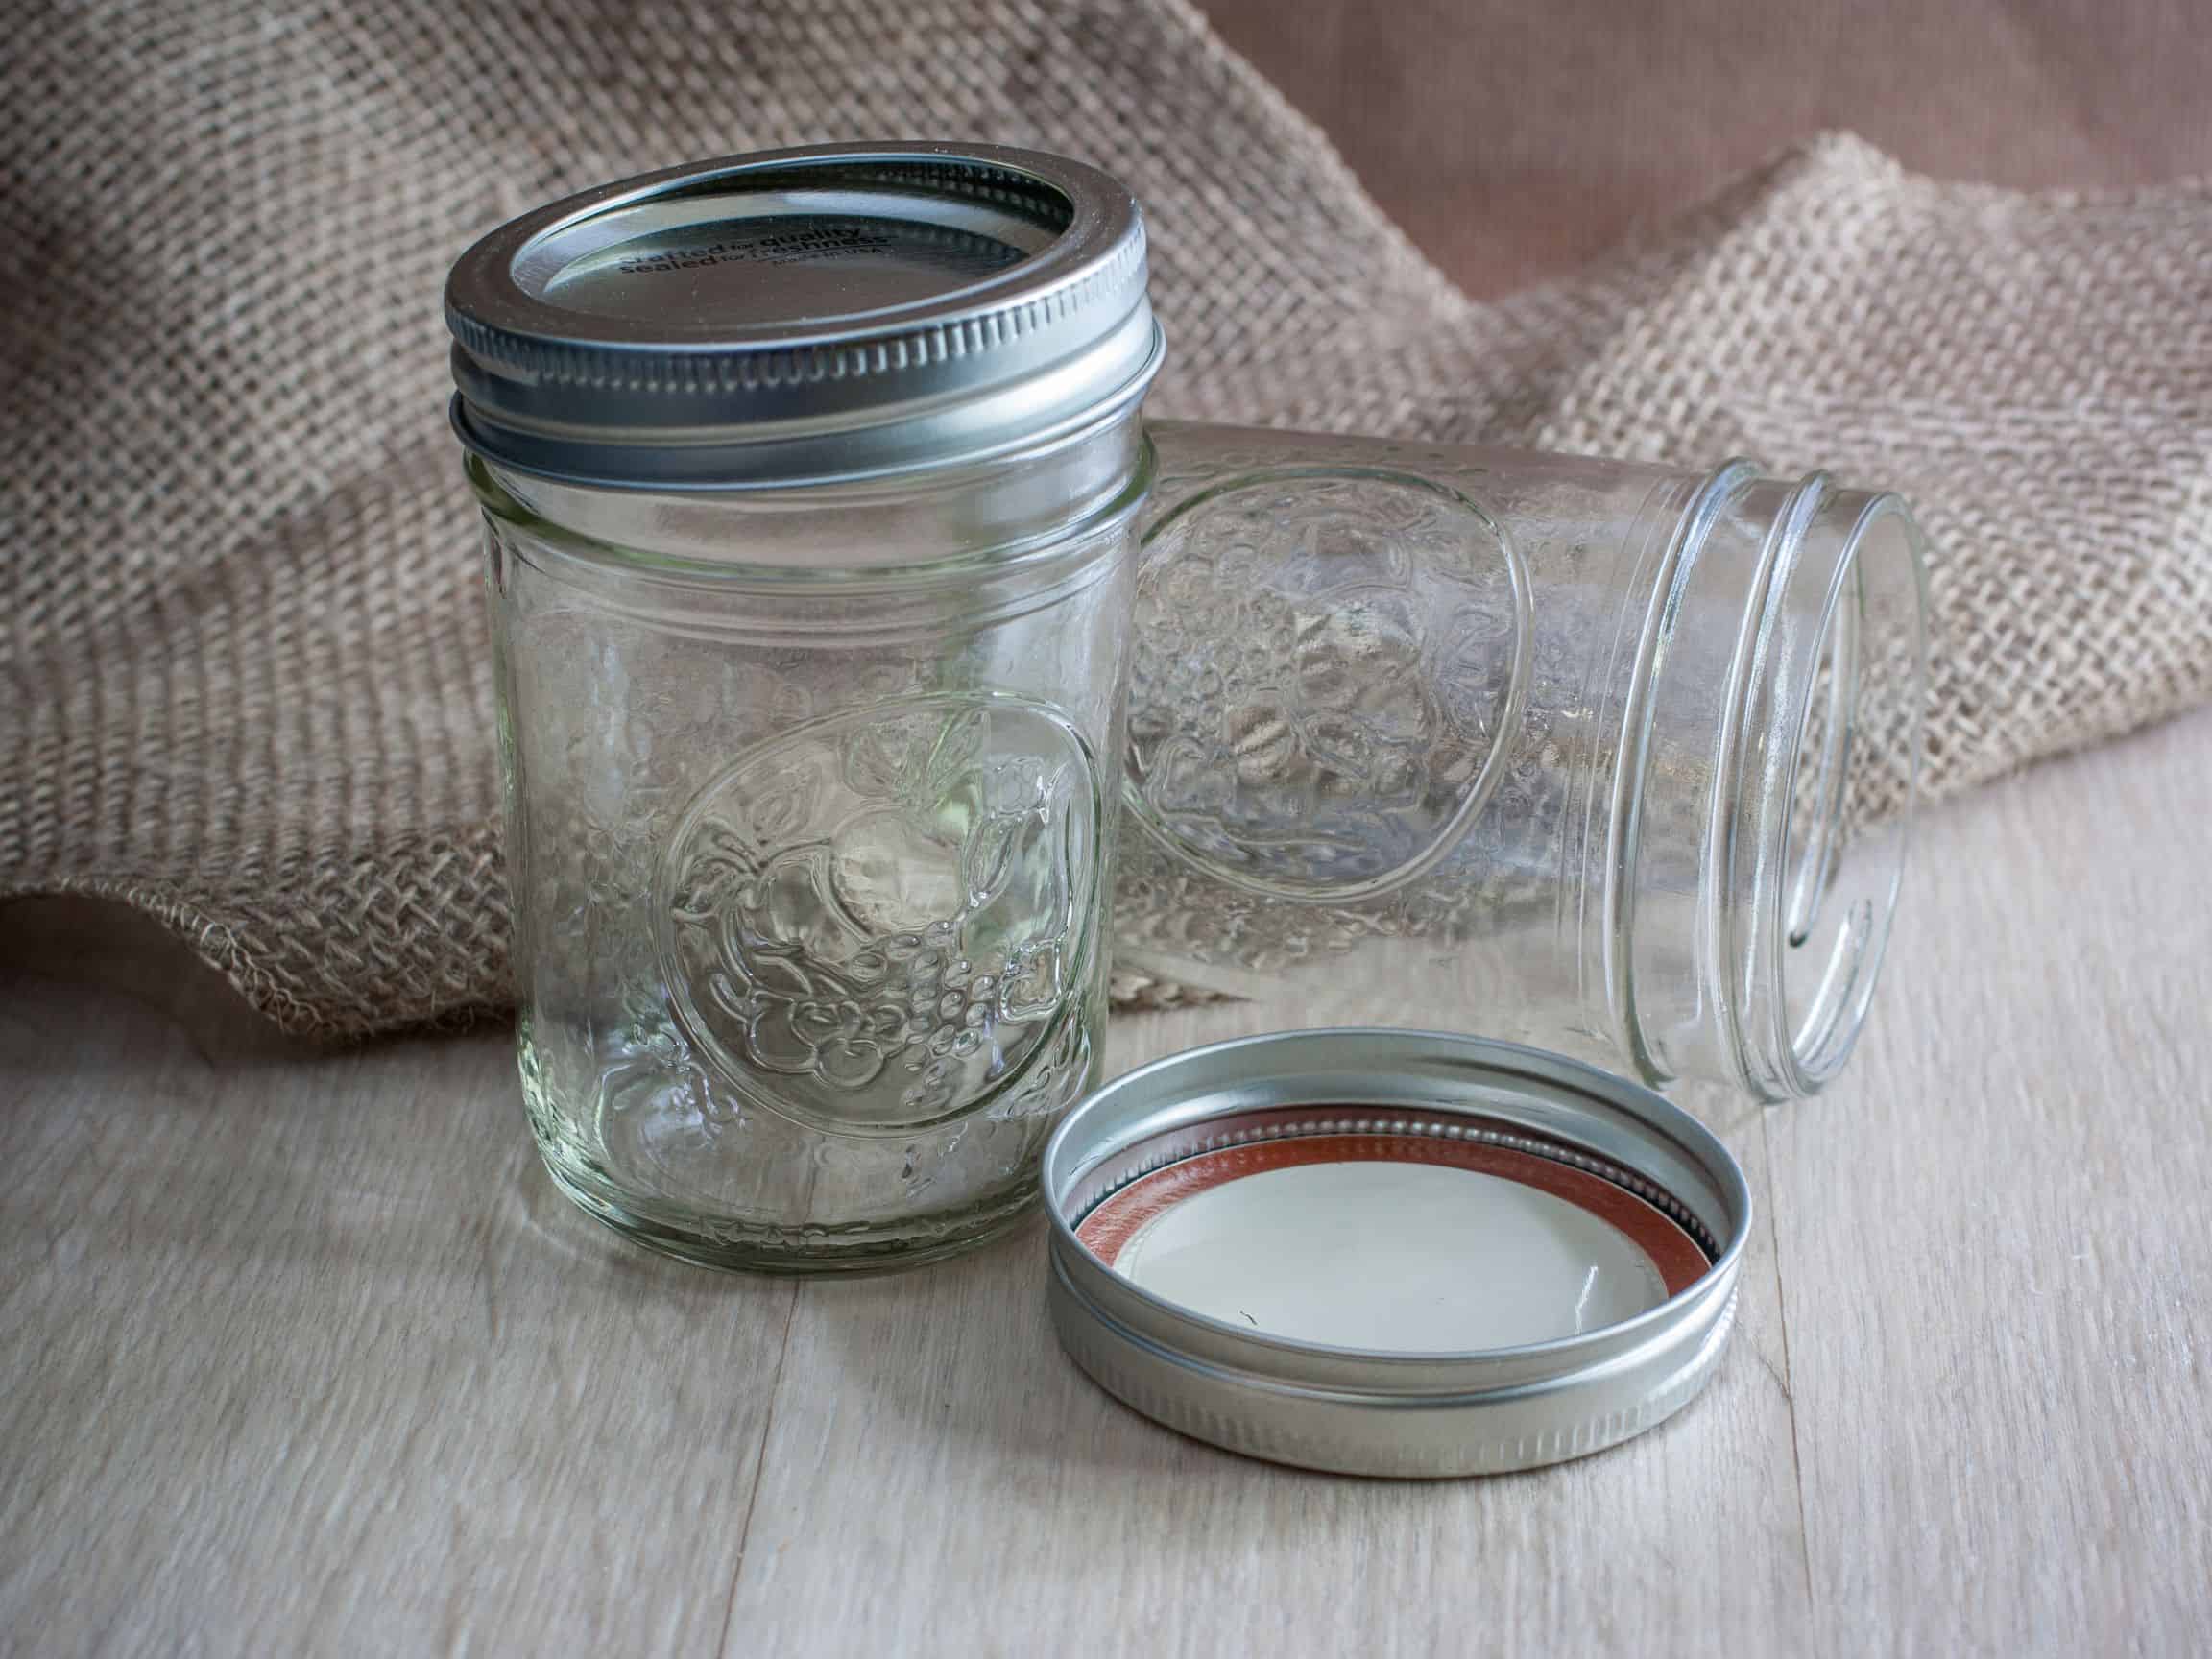 Two empty mason jars on a wooden surface.